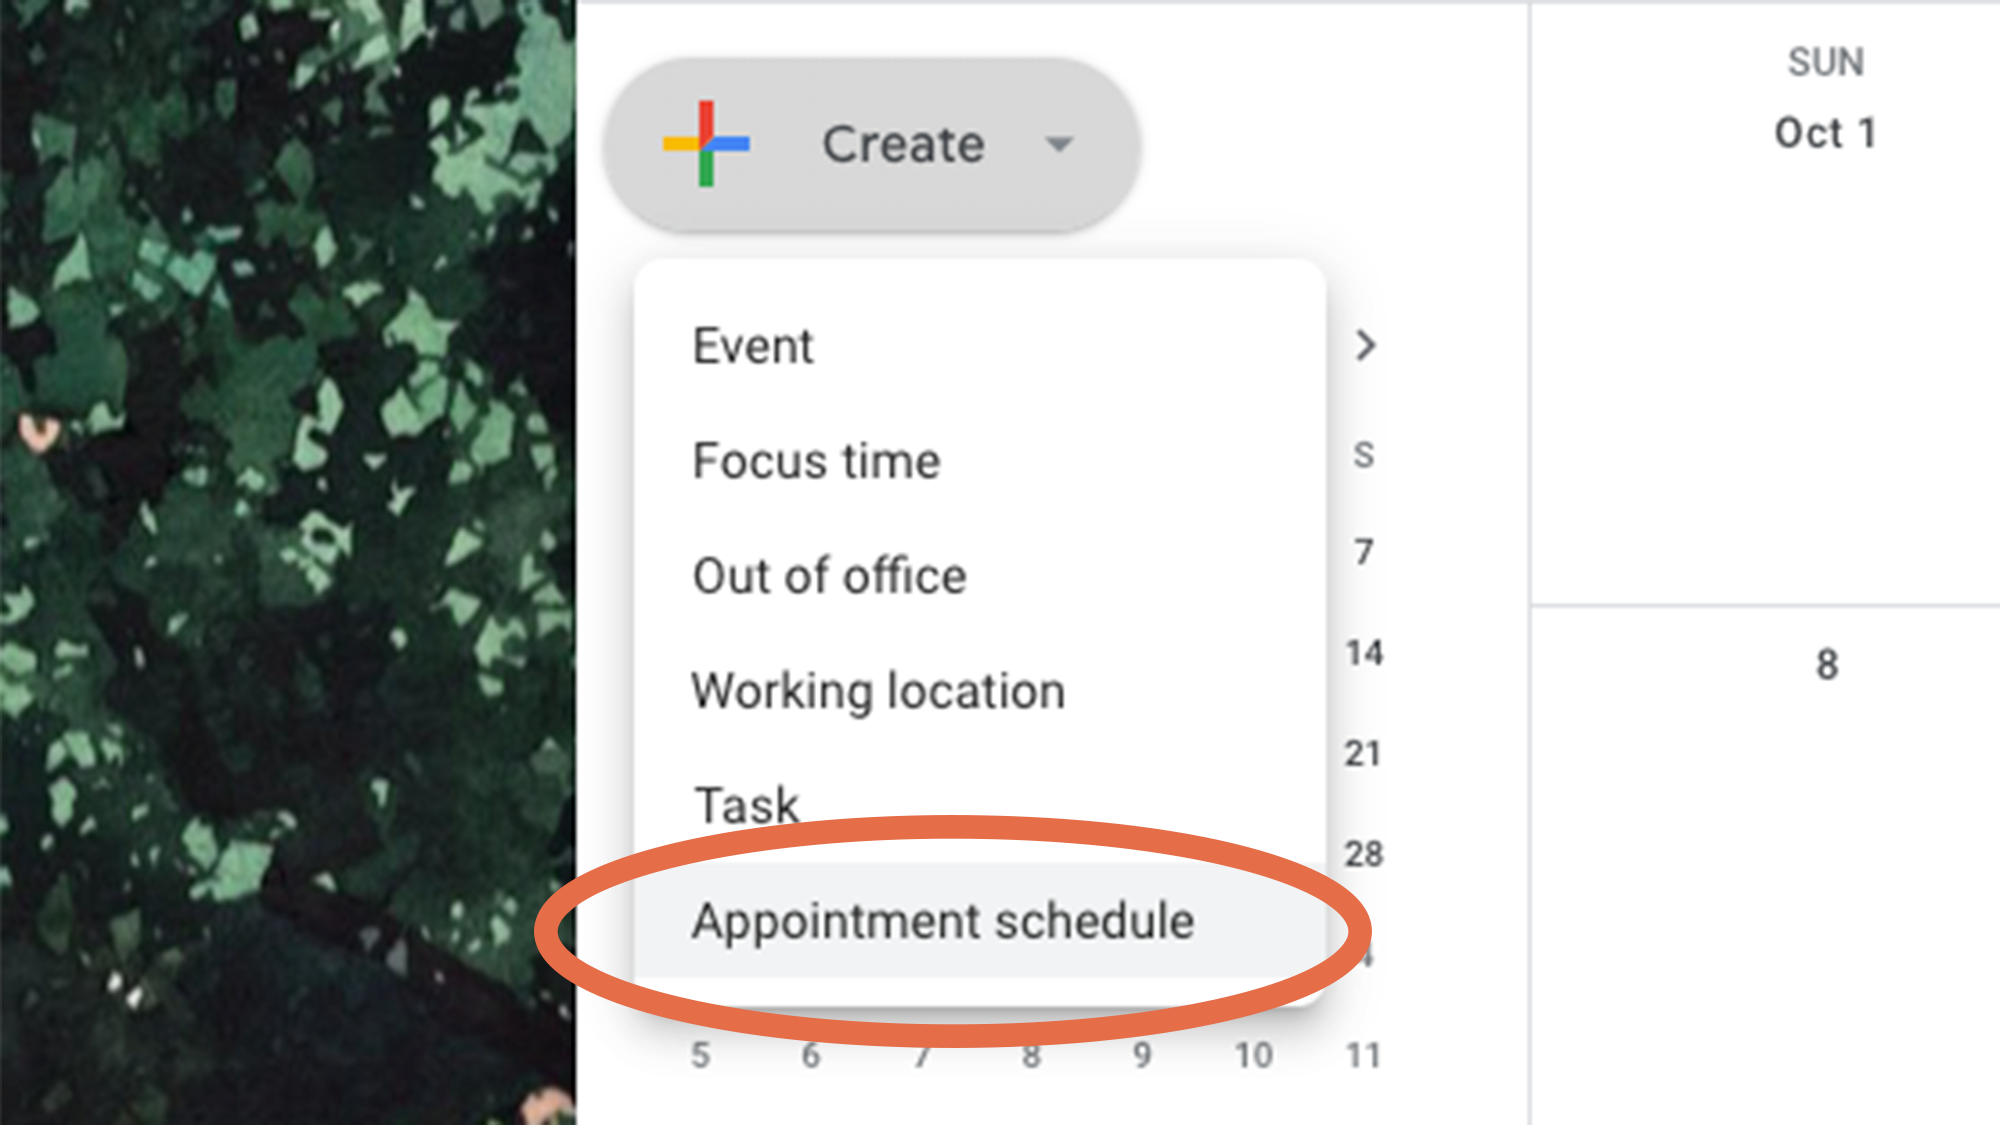 Screen showing Appointment schedule option menu